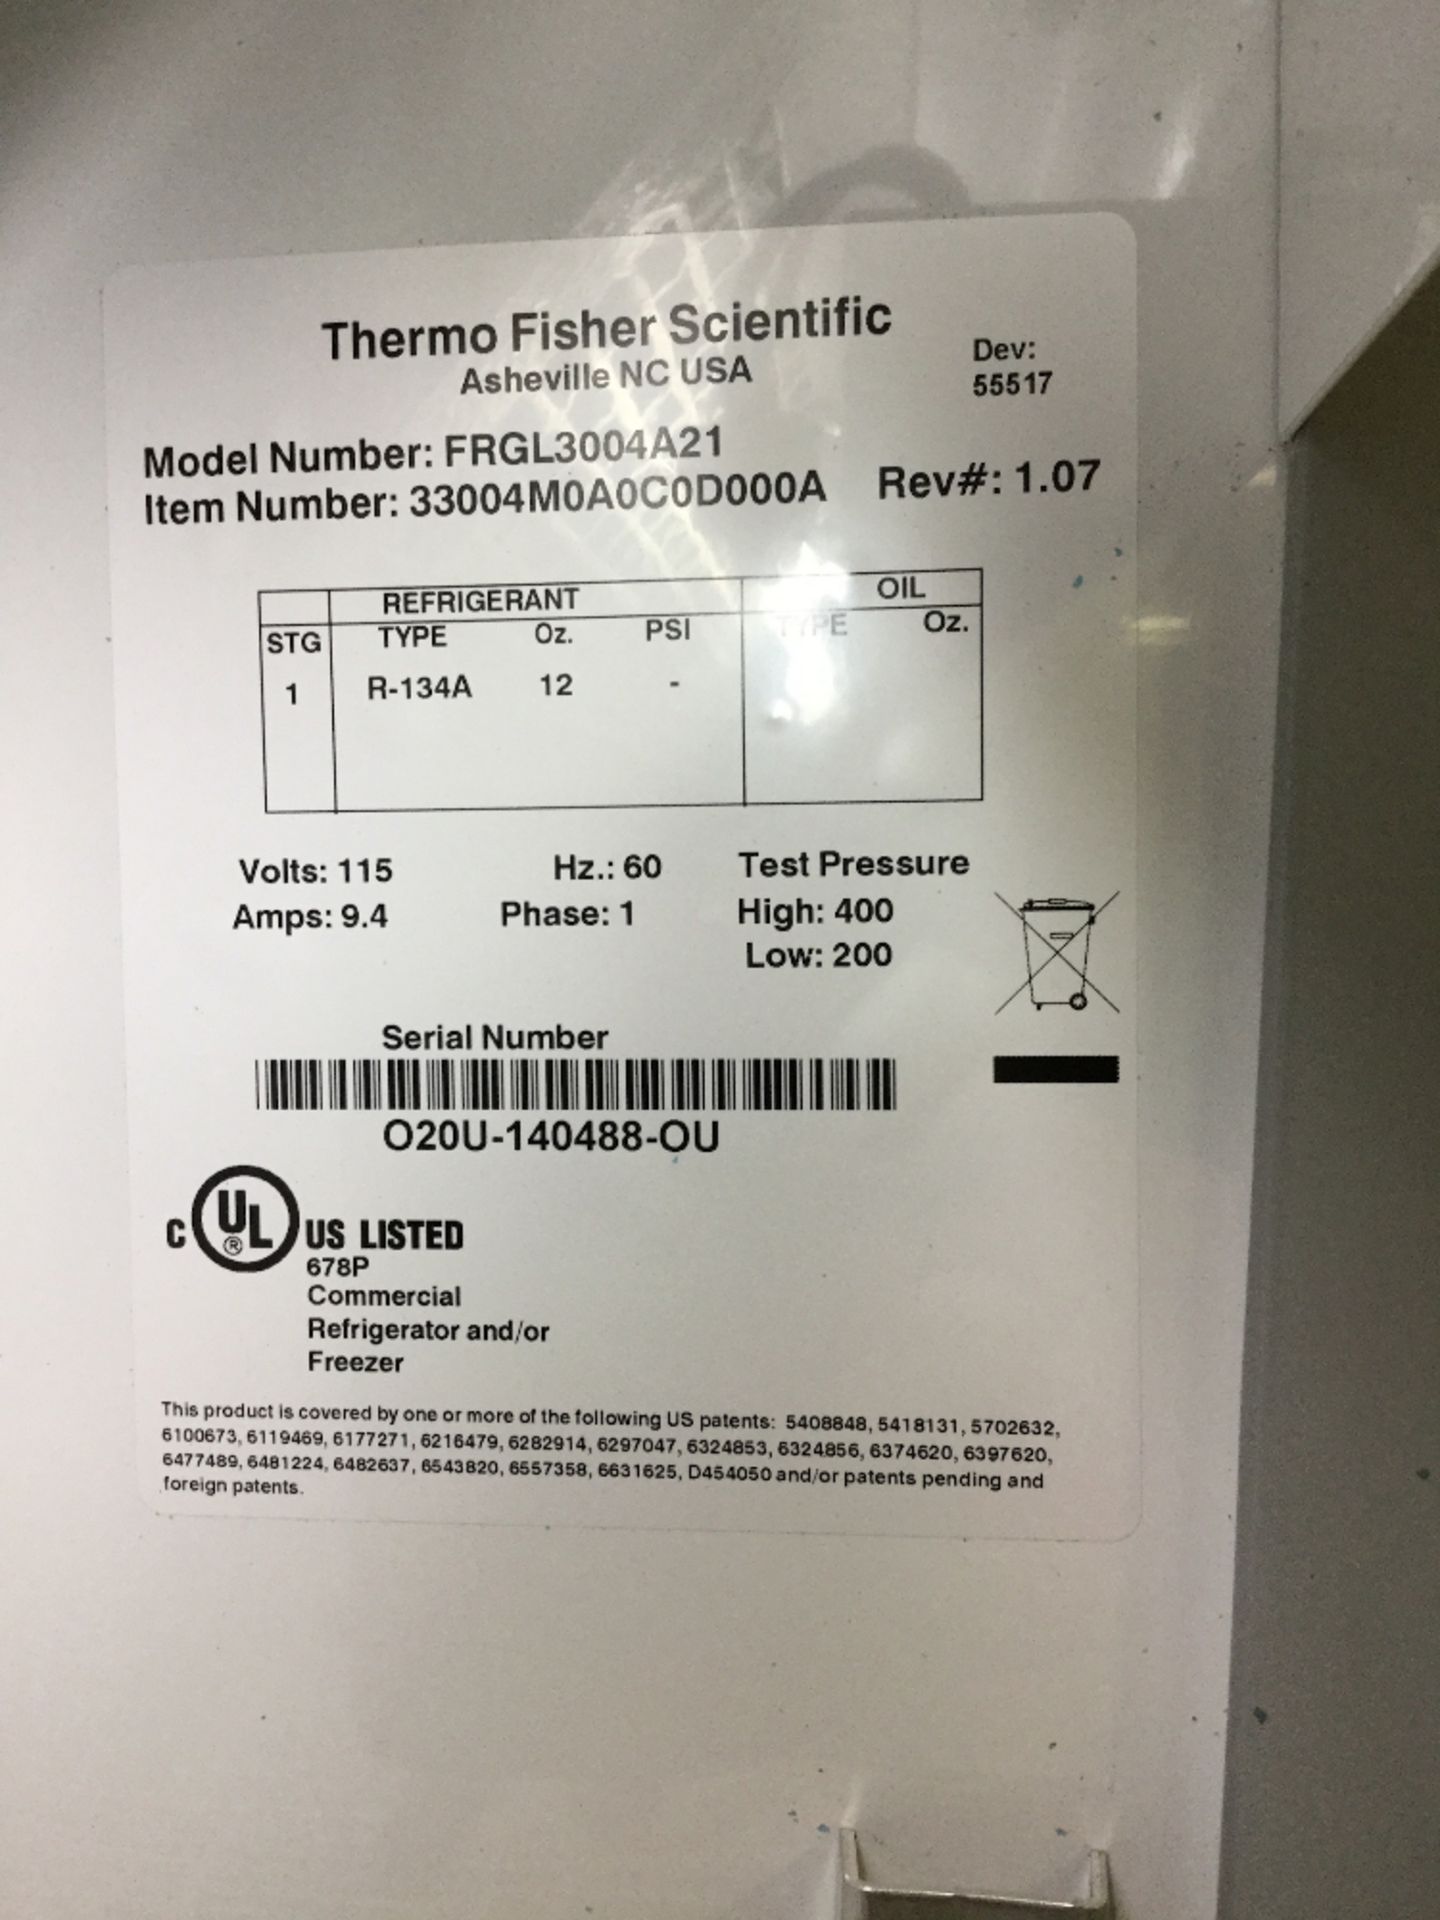 Thermo Fisher Scientific Forma FRGL3004A21 Lab Refrigerator - Image 3 of 3